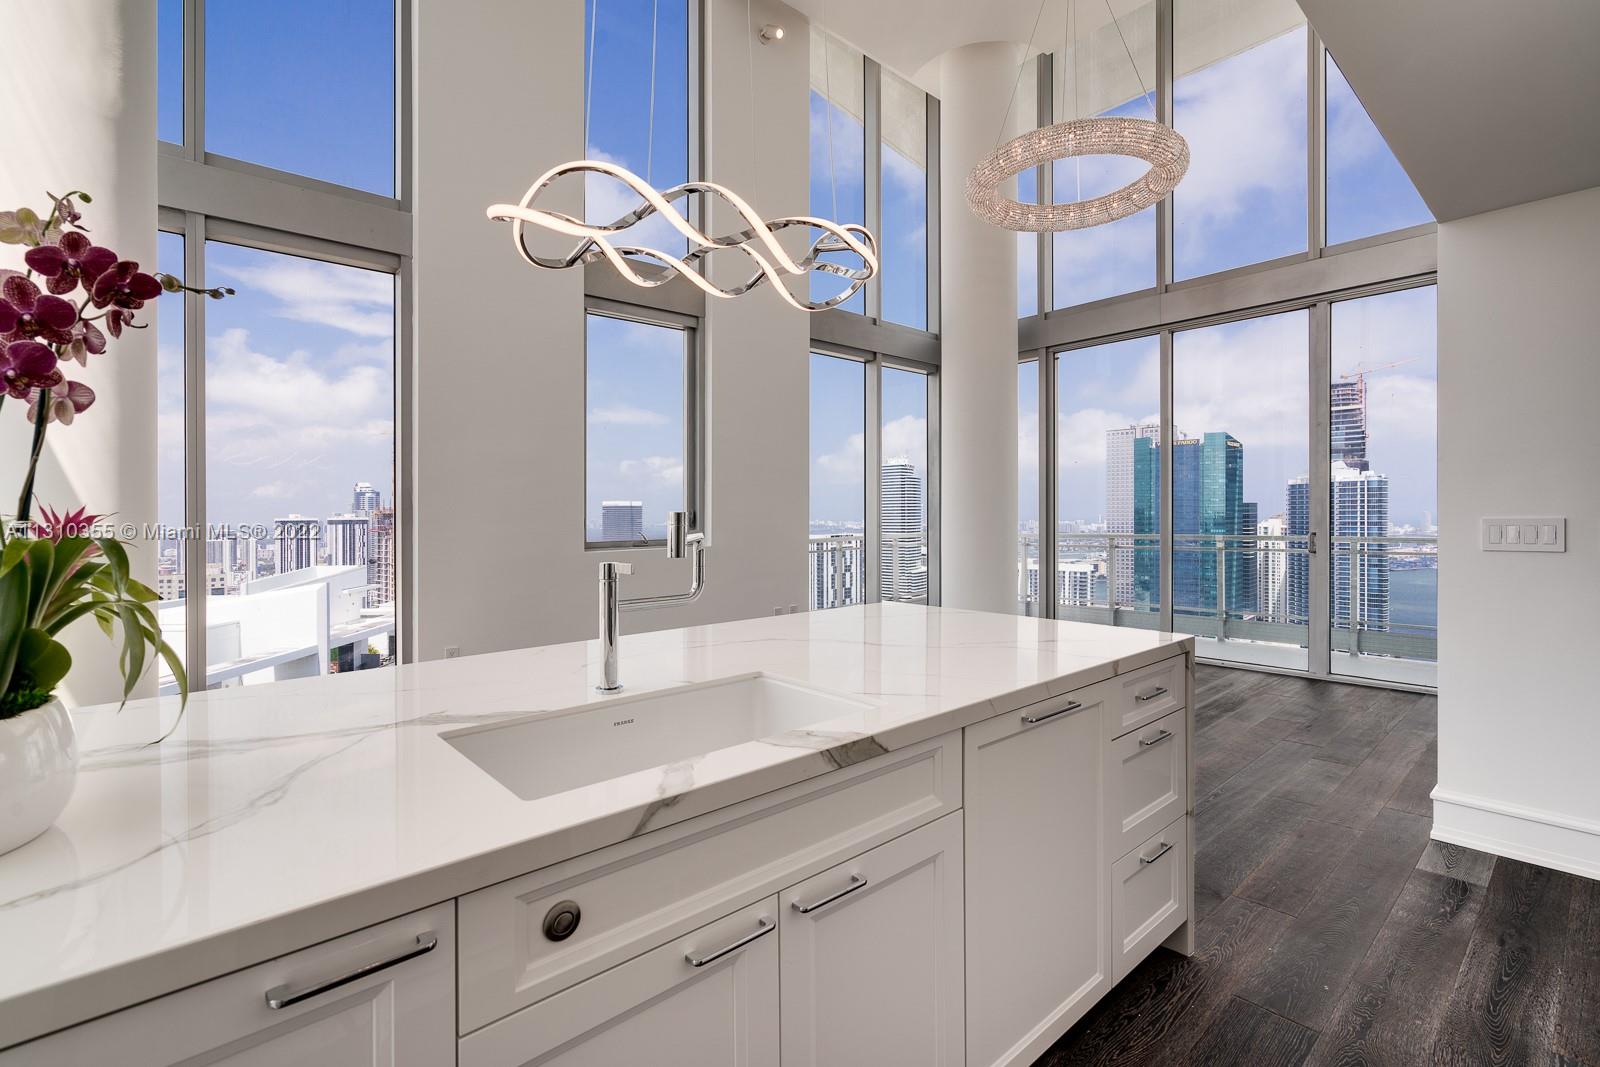 Re-priced at APPRAISED value! Jaw-dropping, fully customized & BRAND NEW PH @ Mint: No detail has been overlooked in this top floor 3 bed w/double-height ceilings & 3 view exposures - 270+ degrees of ever-changing skyline, water, and sunset + sunrise views. Hardwood floors, electronic retracting light fixtures, imported cabinetry w/integrated Bosch & Miele appliances, Franke kitchen fixtures, calcutta book-matched marble bath, designer bath vanities and fixtures, designer baseboards, linear diffusers throughout, 2 dual-cycle Miele washer/dryers, LG Steam Closet, custom doors & hardware, multi-color LED lighting. New Bosch AC system, new plumbing. XL storage room inside unit. 26 impact windows in living area for ultimate entertaining. Waterfront, gated complex; quick walk into Brickell.